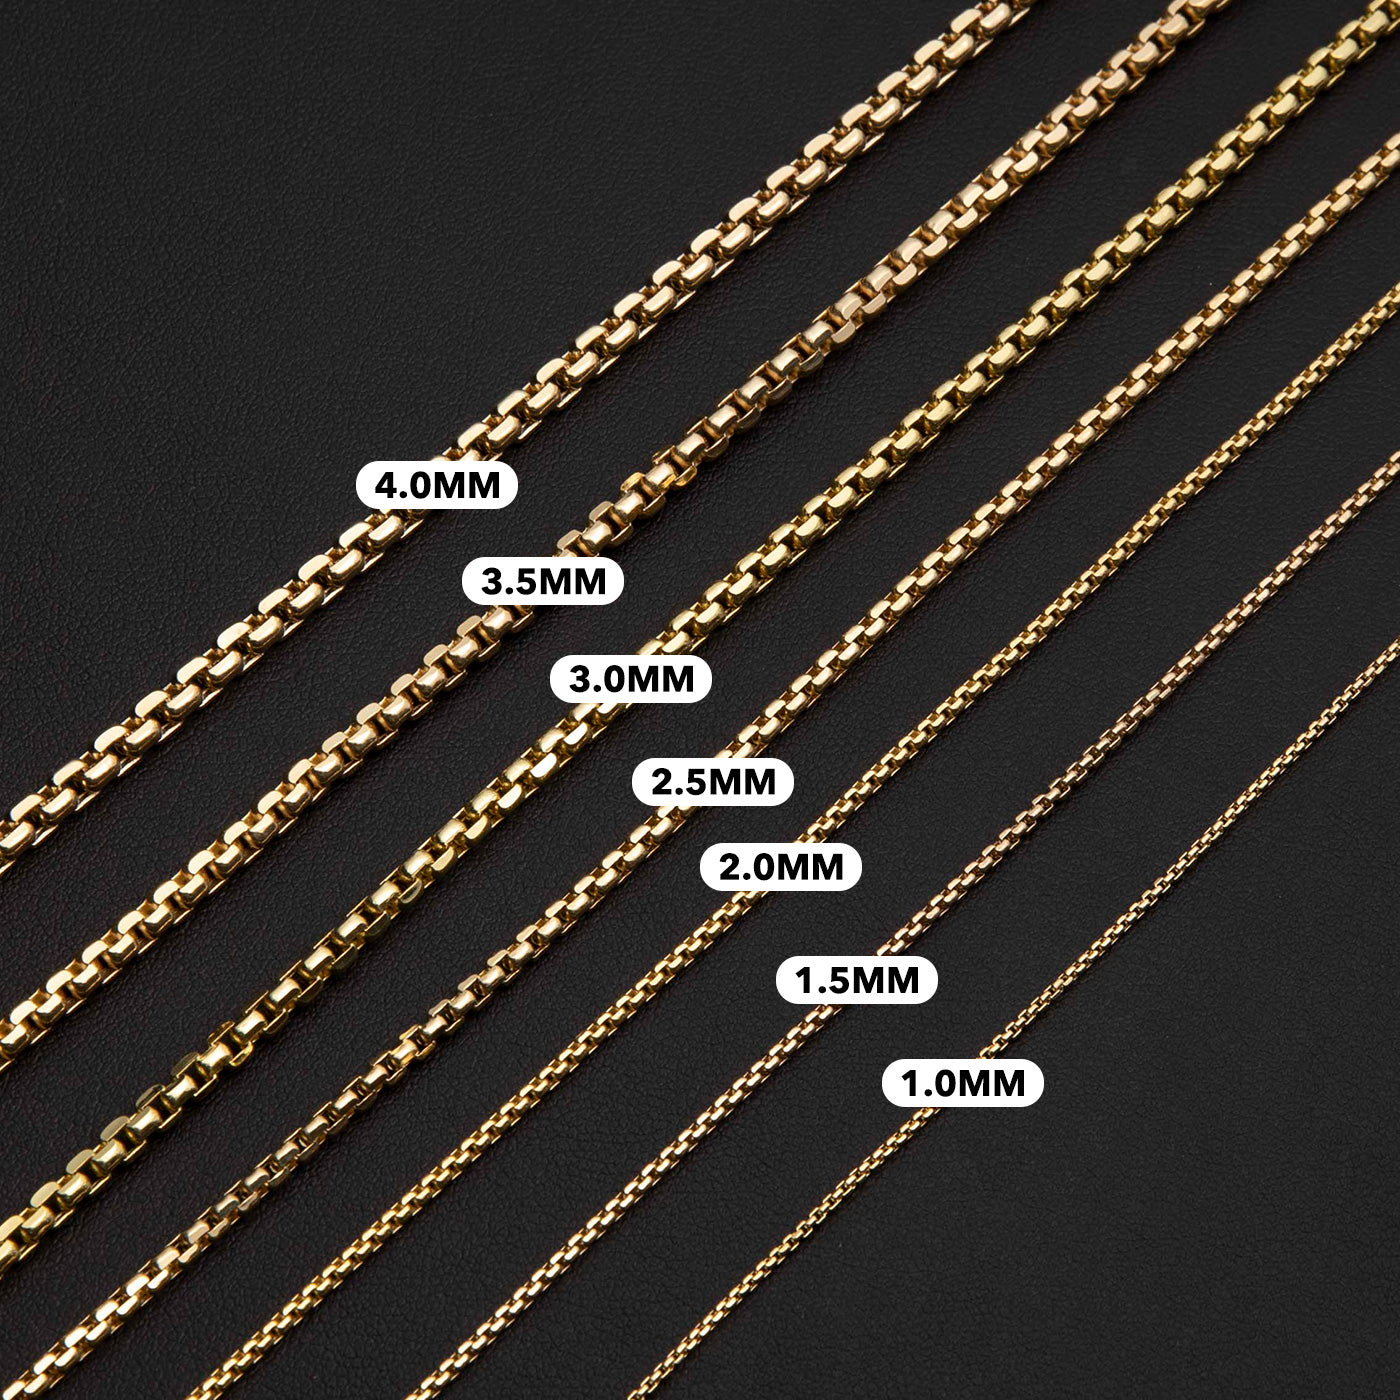 Round Box Link Chain Necklace 14K Yellow Gold - Hollow